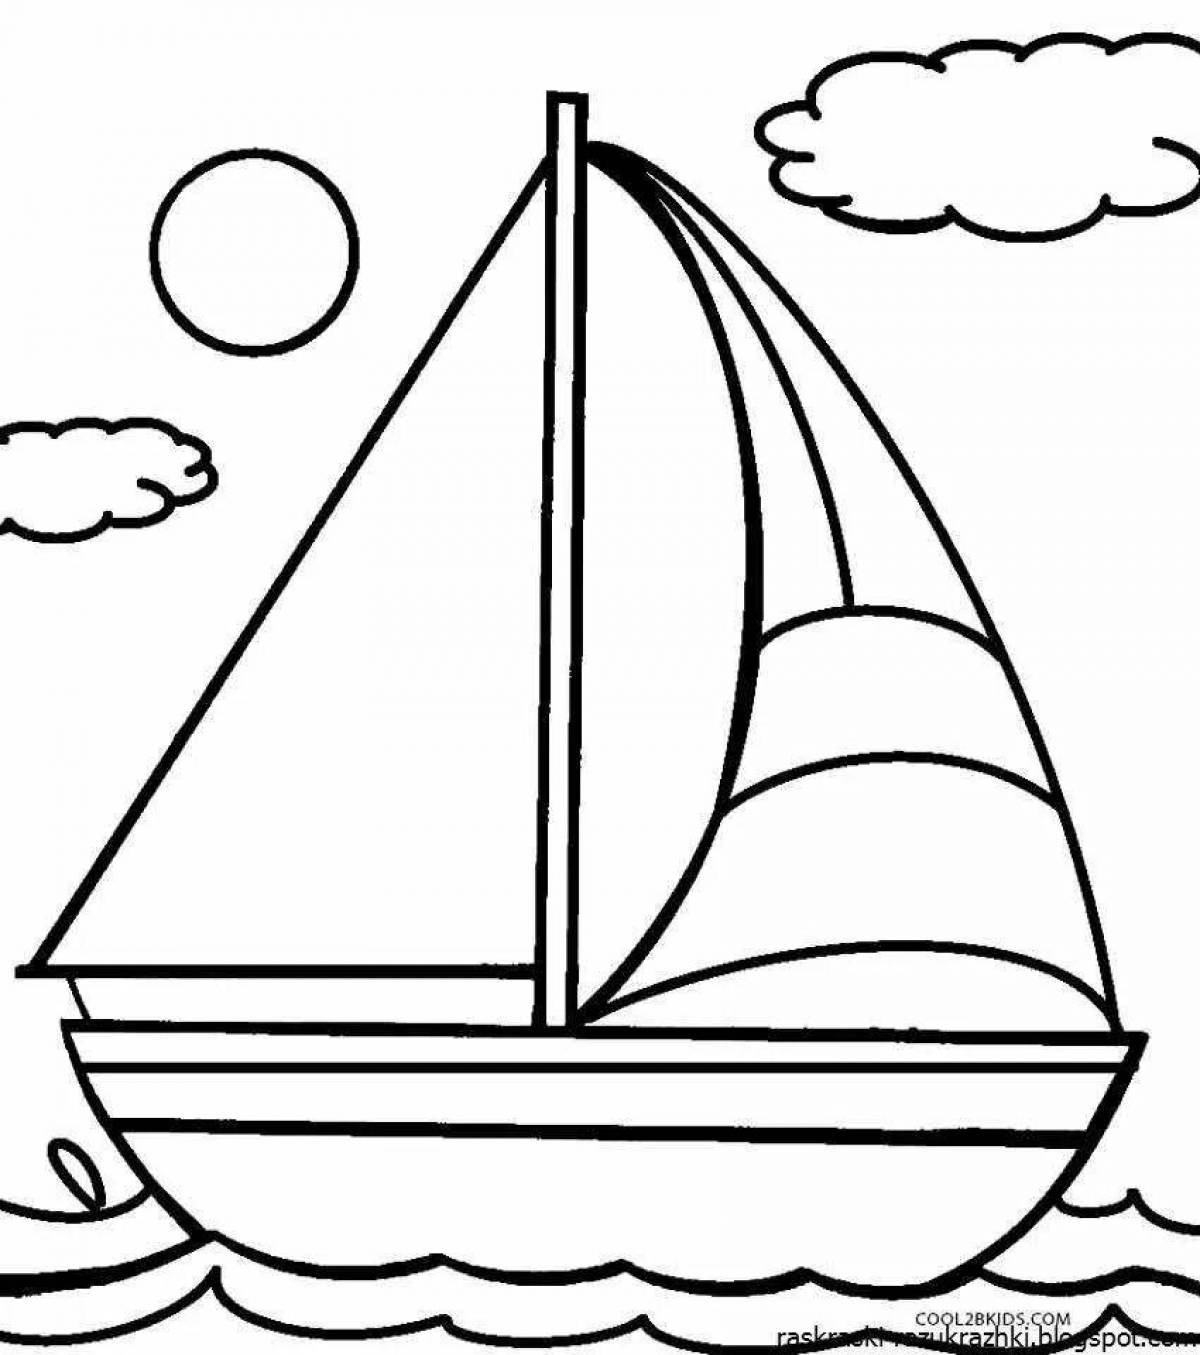 Fun coloring for water transport